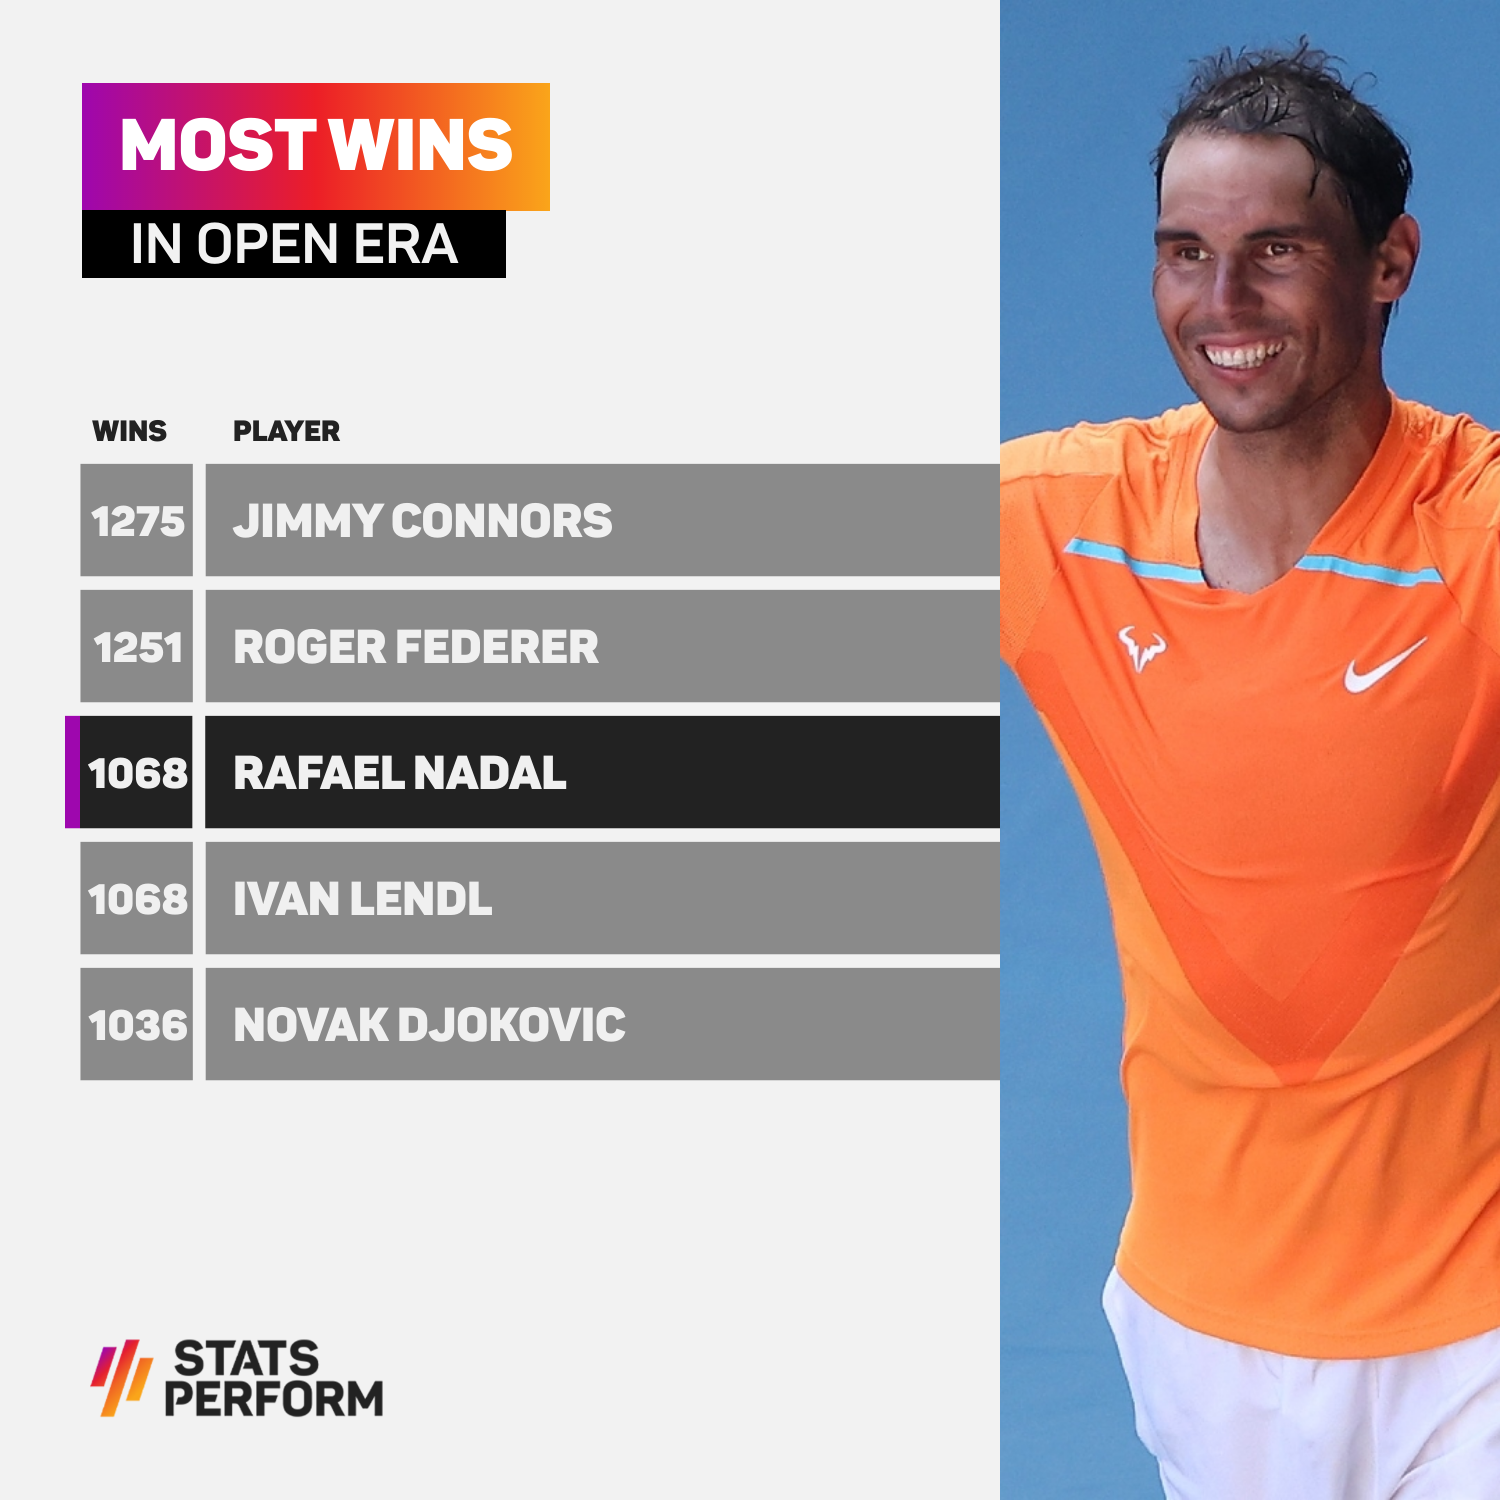 Rafael Nadal is joint-third in the list of most wins in the Open Era